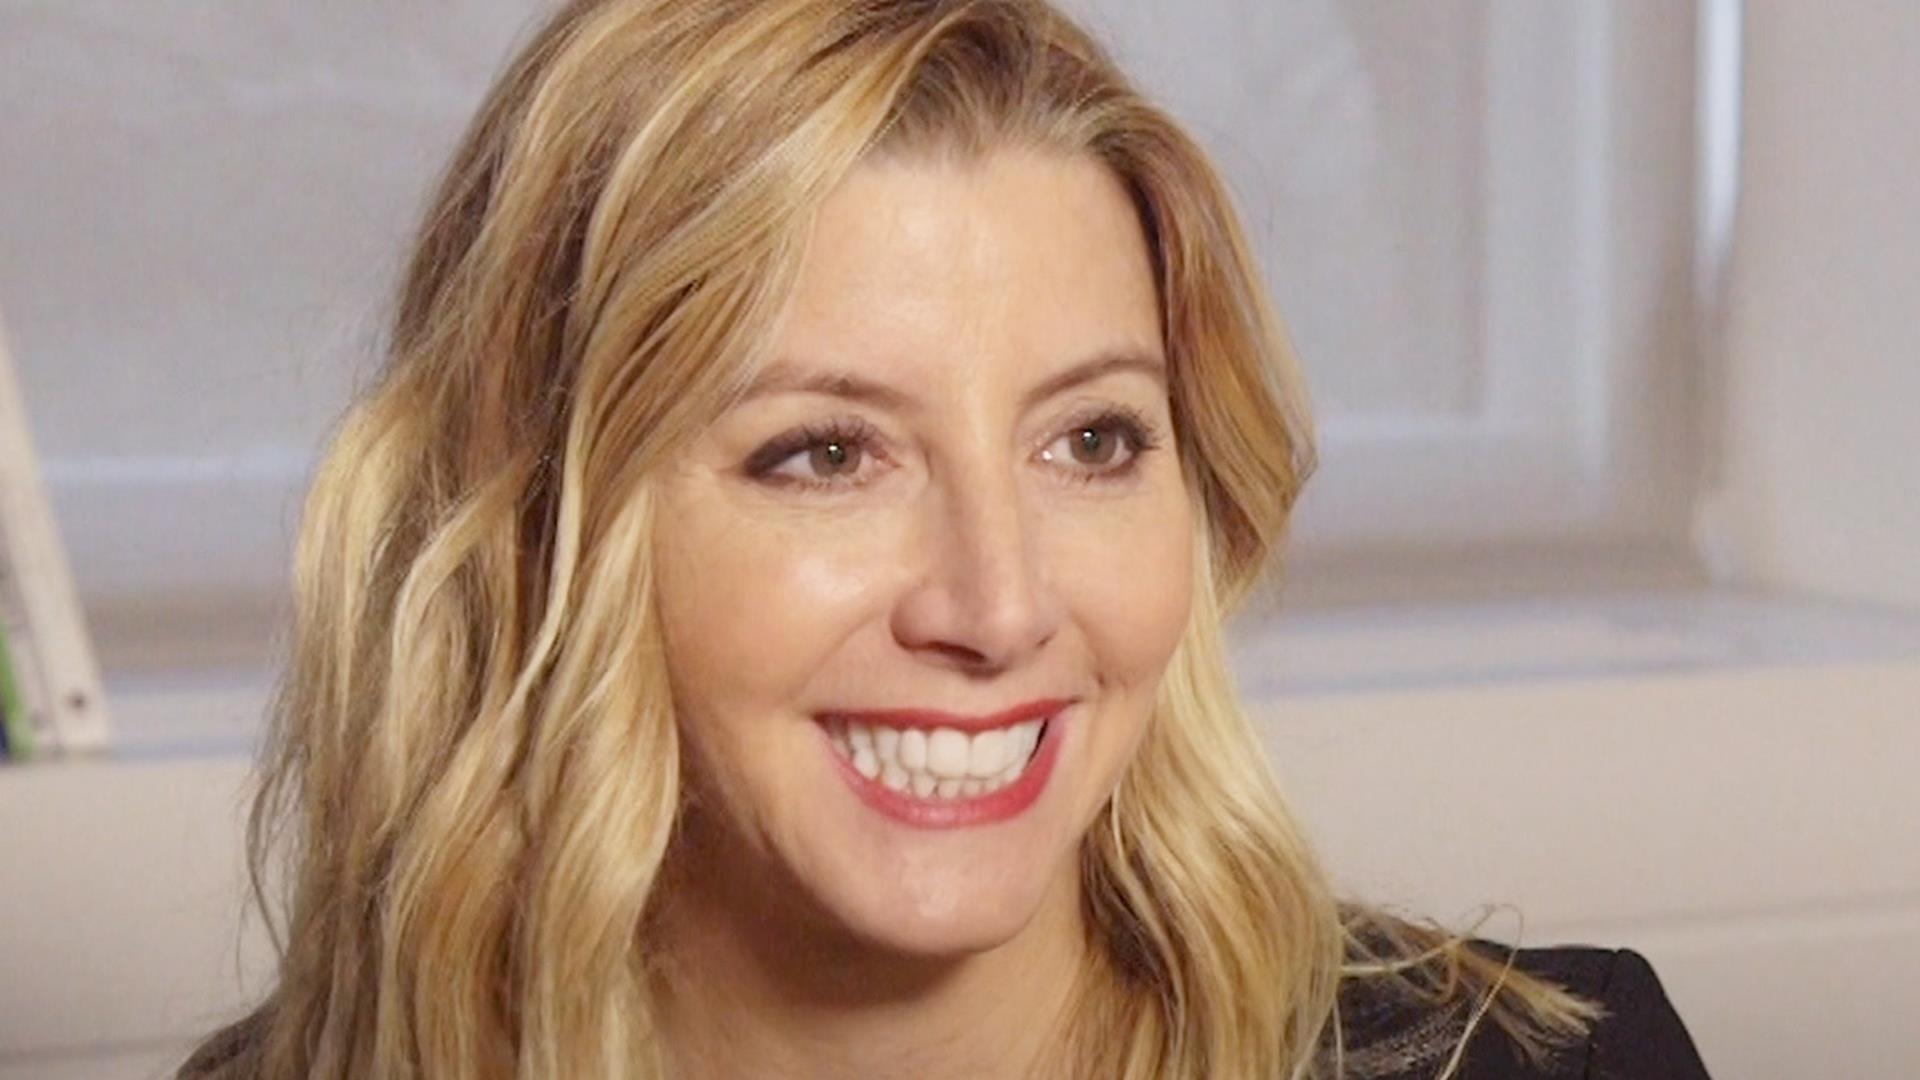 The CEO Partner - Sara Blakely, the billionaire founder of Spanx